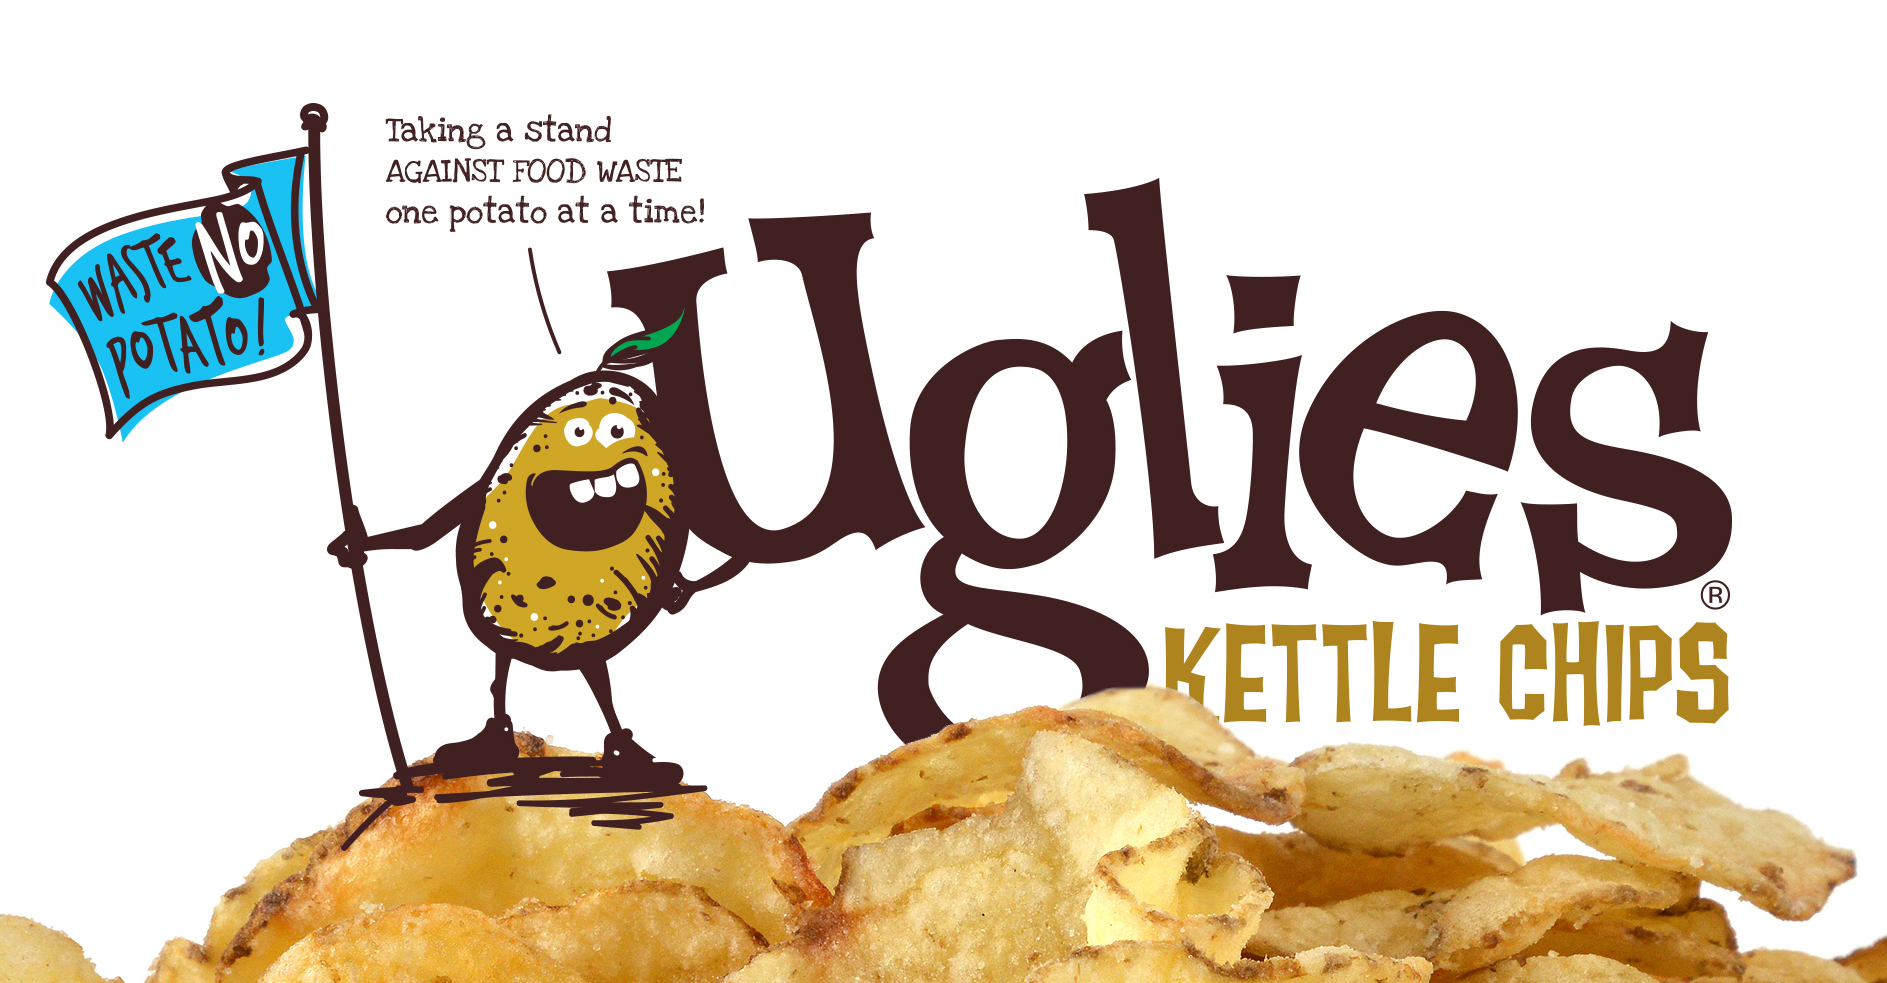 Uglies Kettle Chip Logo With Chips